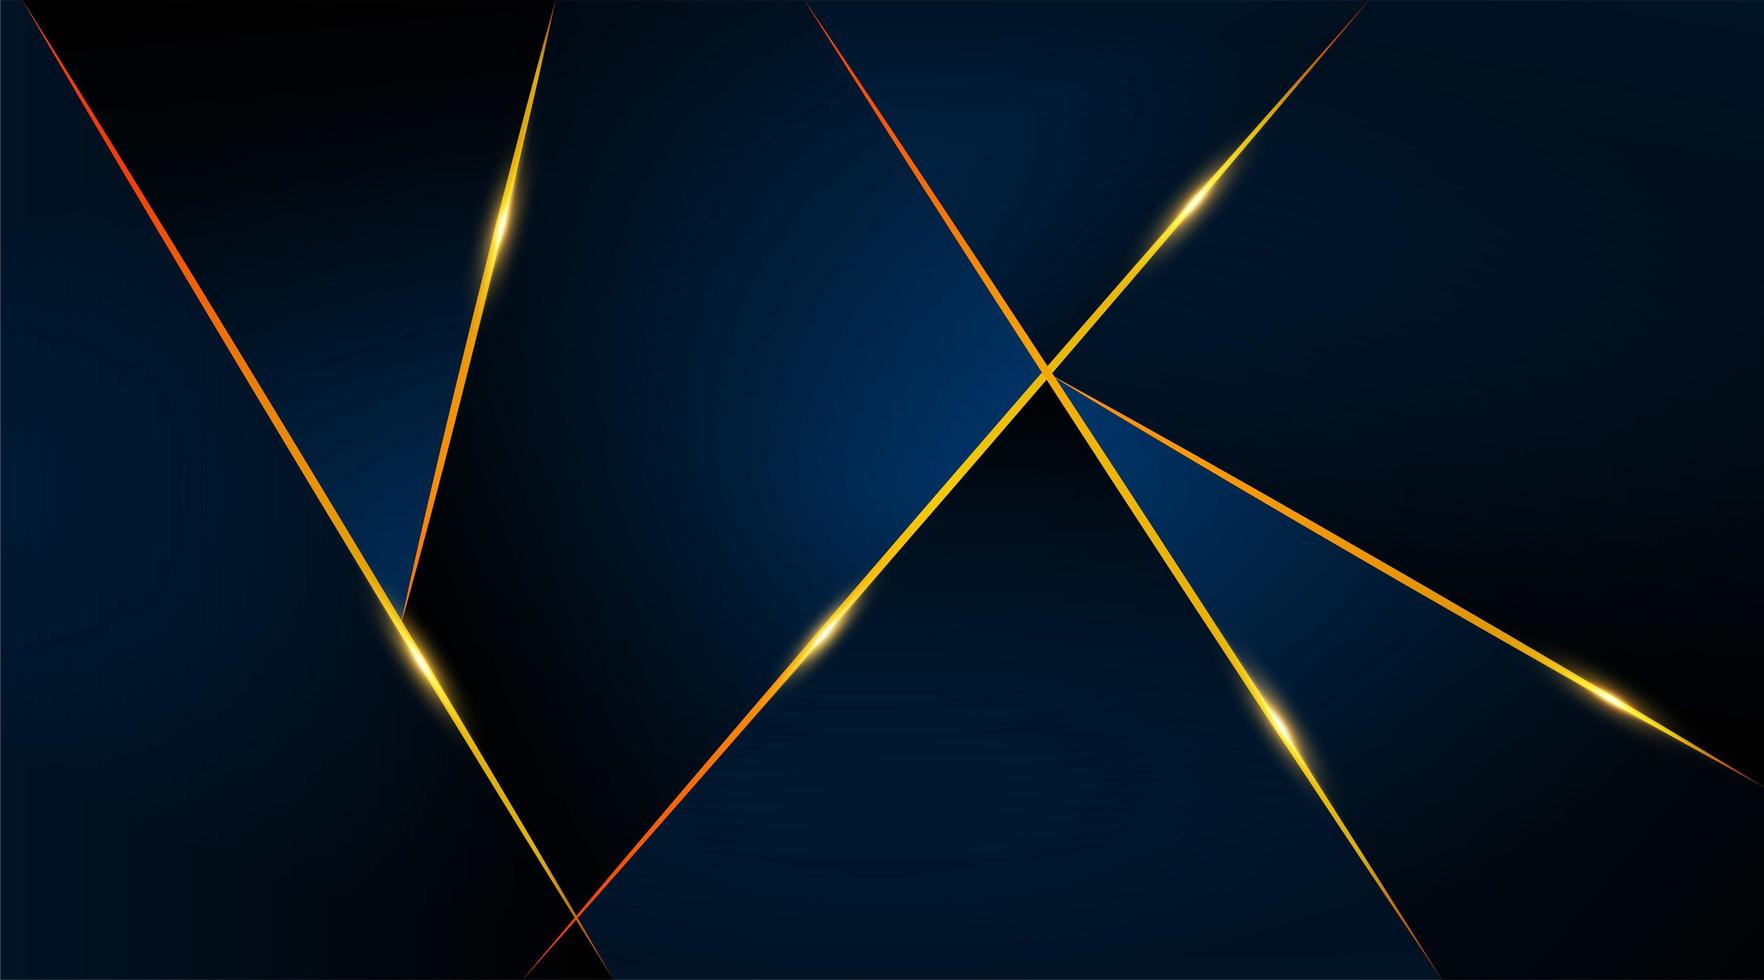 Modern geometric luxury card template for business or presentation with golden lines on a dark blue background vector